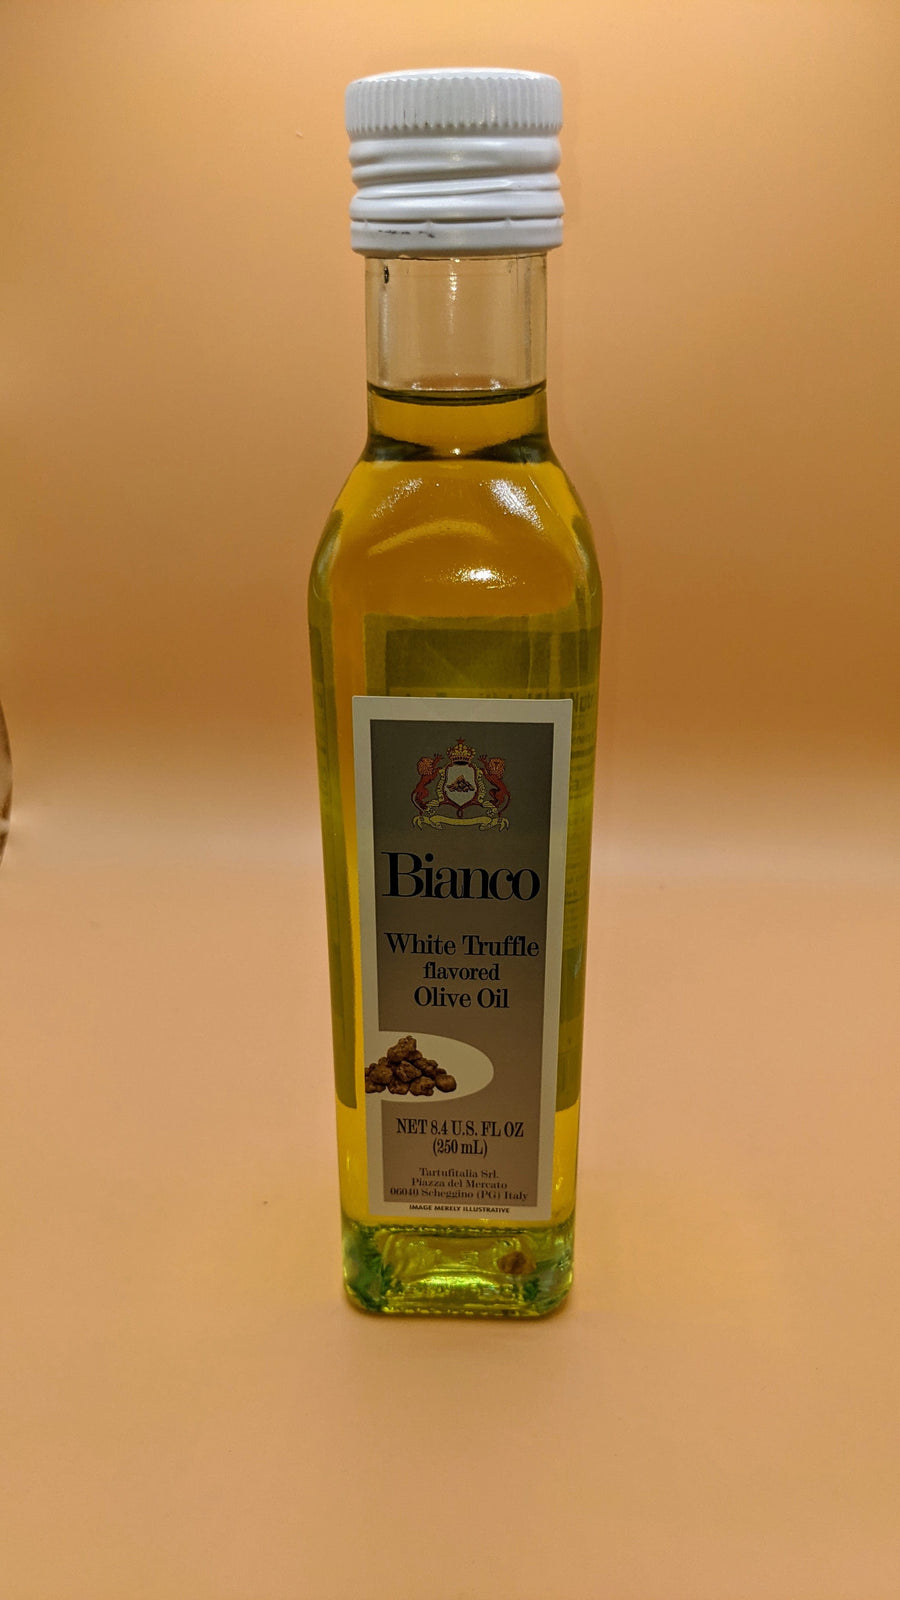 Bottle-of-Bianco-Olive-Oil-White-truffle-8.4-oz-real-gourmet-food-foodie